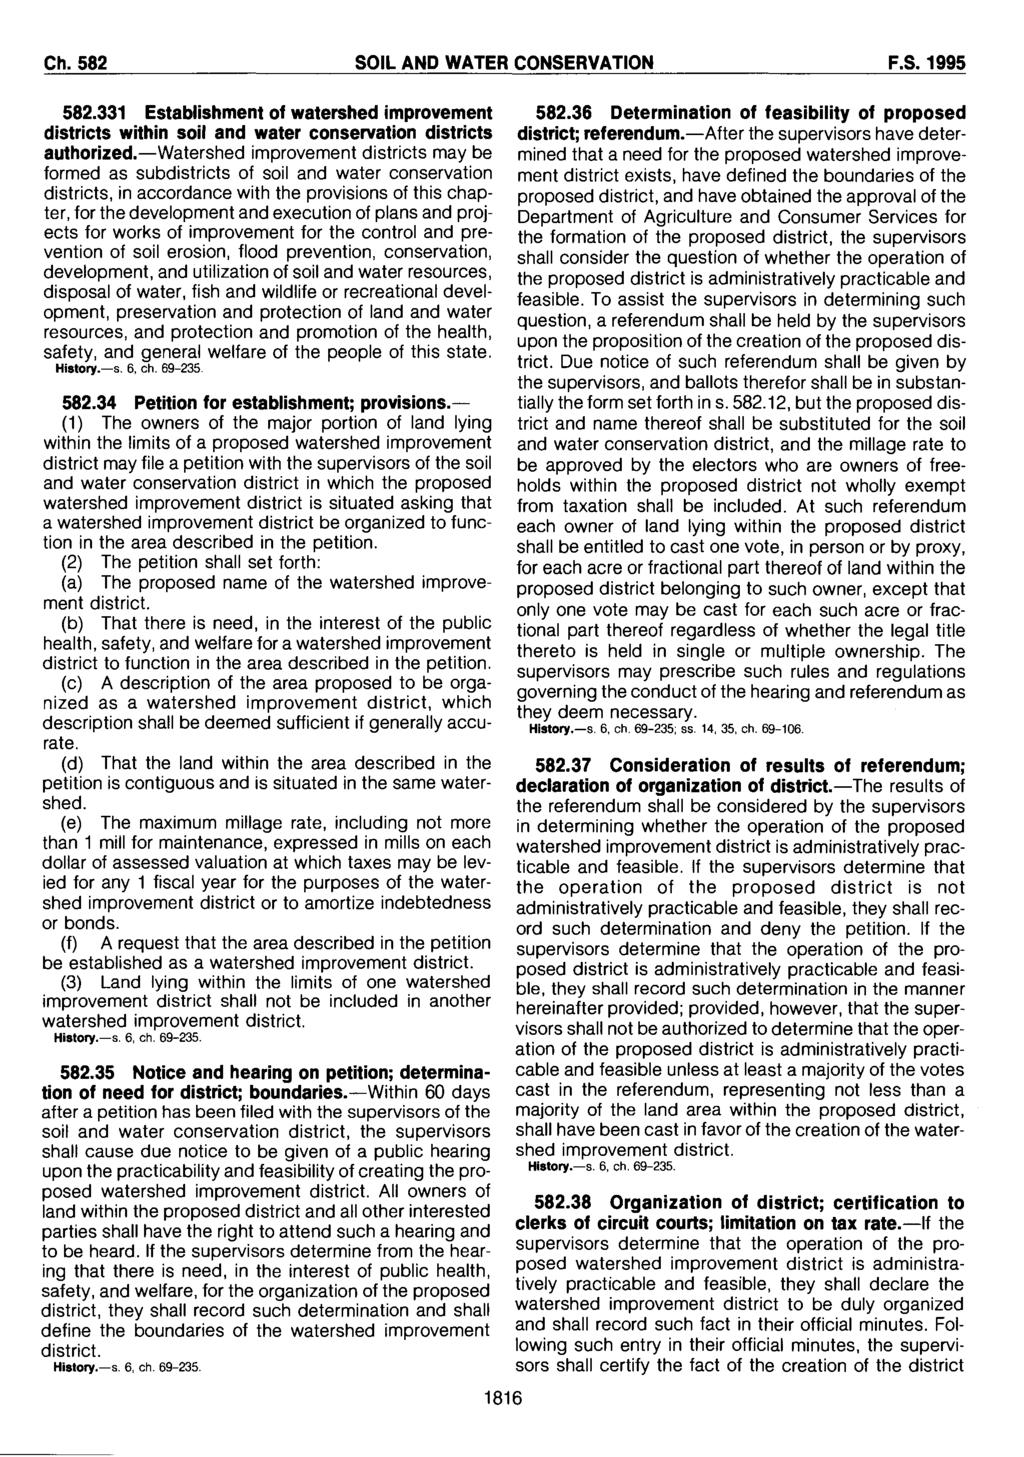 Ch. 582 SOIL AND WATER CONSERVATION F.S.1995 582.331 Establishment of watershed improvement districts within soil and water conservation districts authorized.